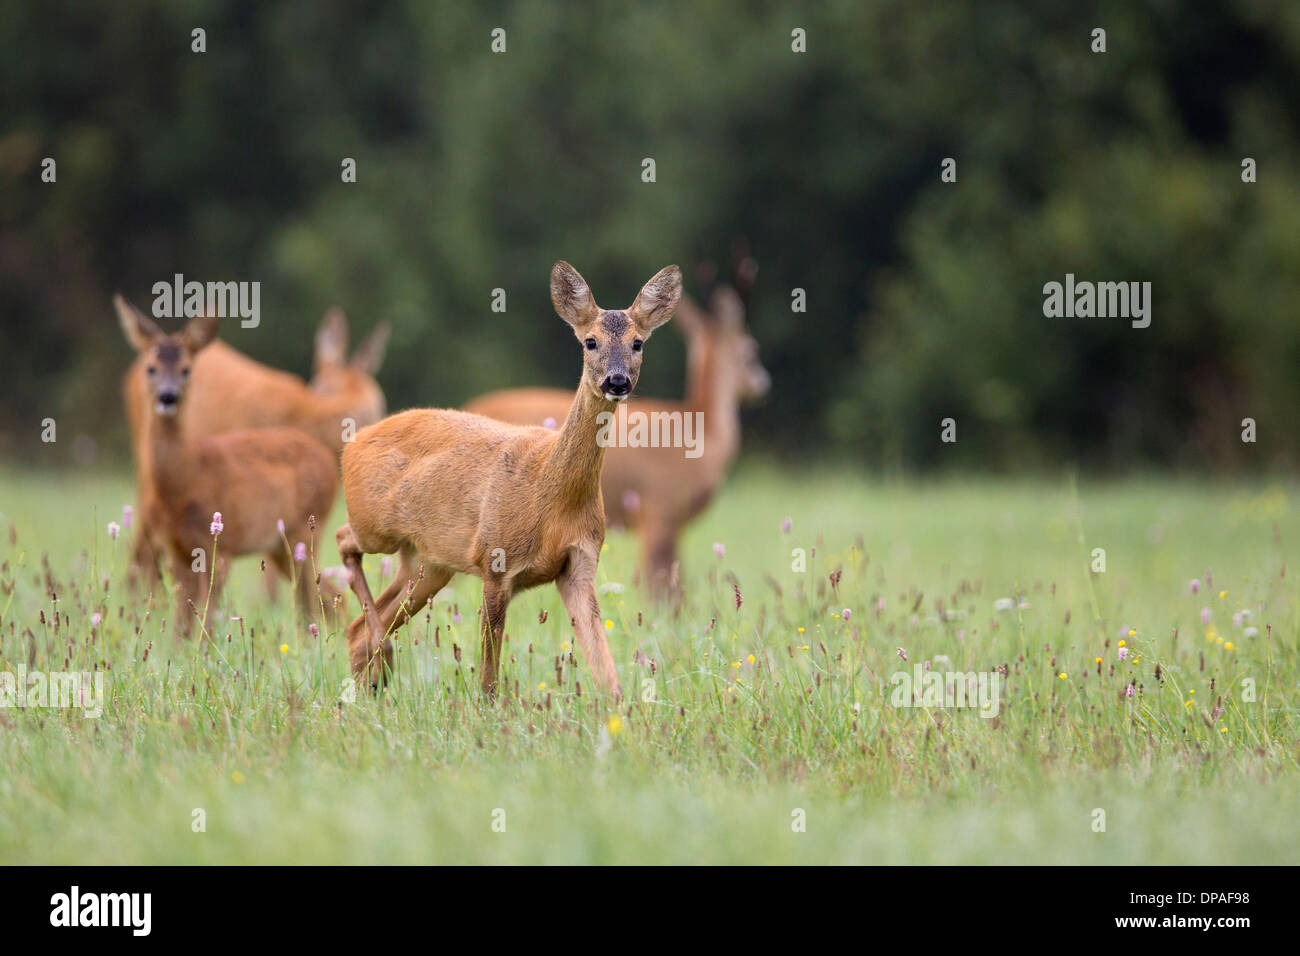 Deer with family Stock Photo